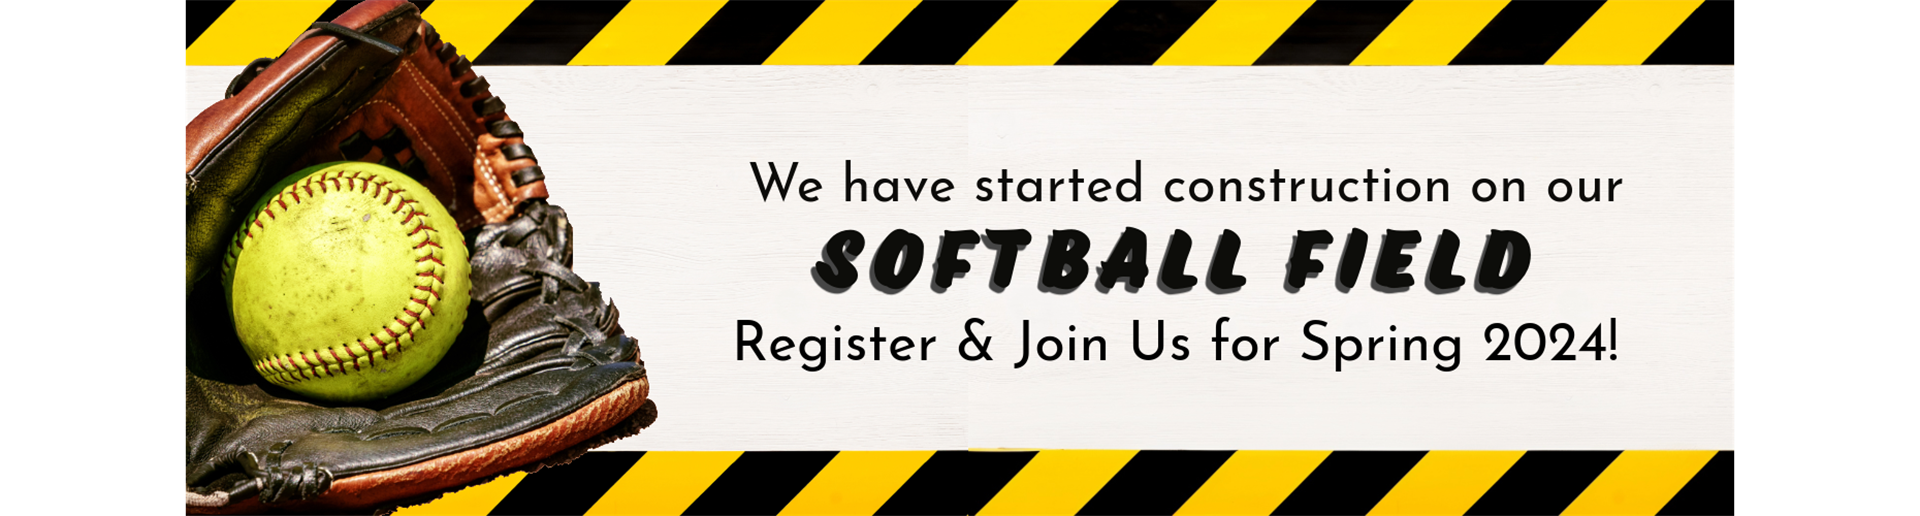 EXPERIENCE SOFTBALL AT TCOLL